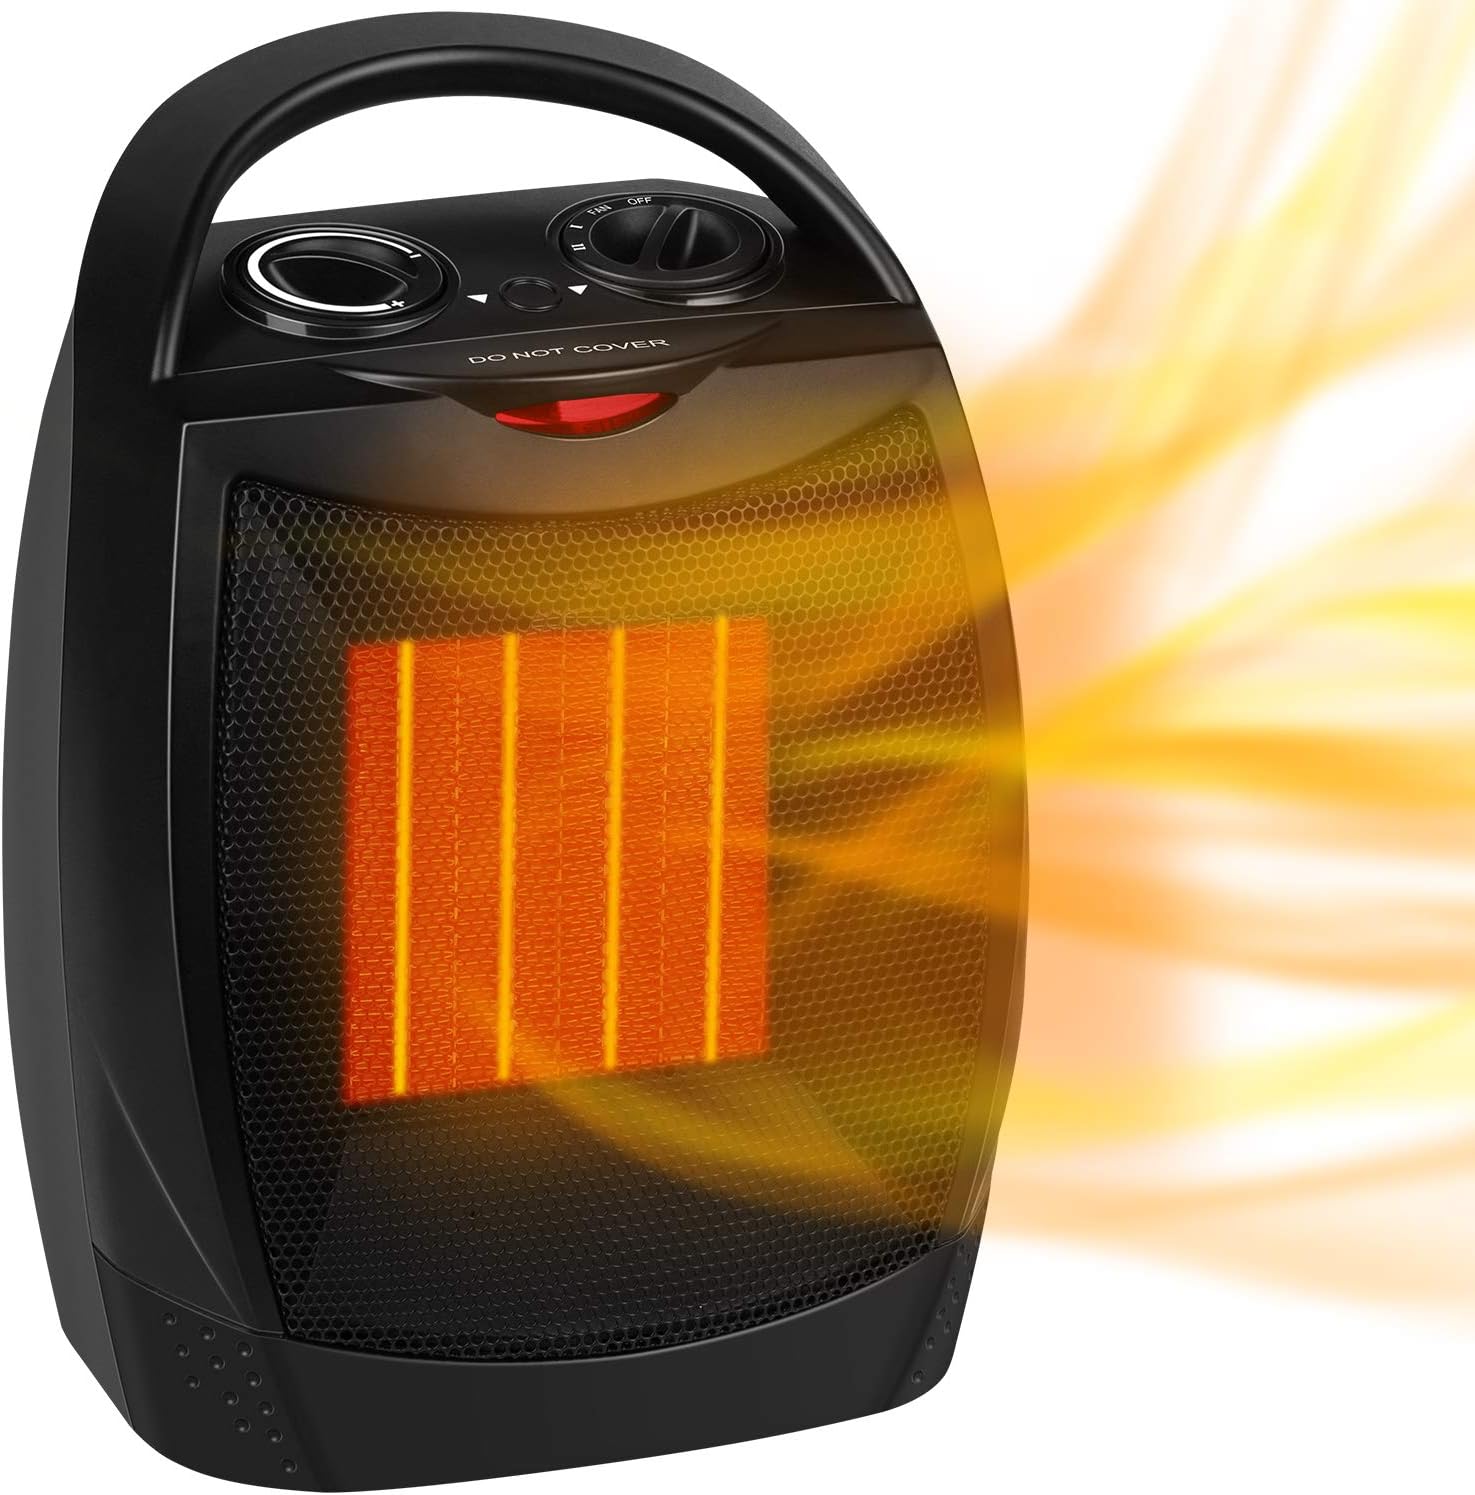 https://bigbigmart.com/wp-content/uploads/2023/11/GiveBest-Portable-Electric-Space-Heater-1500W-750W-Ceramic-Heater-with-Thermostat-Heat-Up-200-Square-Feet-in-Minutes-Safe-and-Quiet-for-Office-Room-Desk-Indoor-Use.jpg